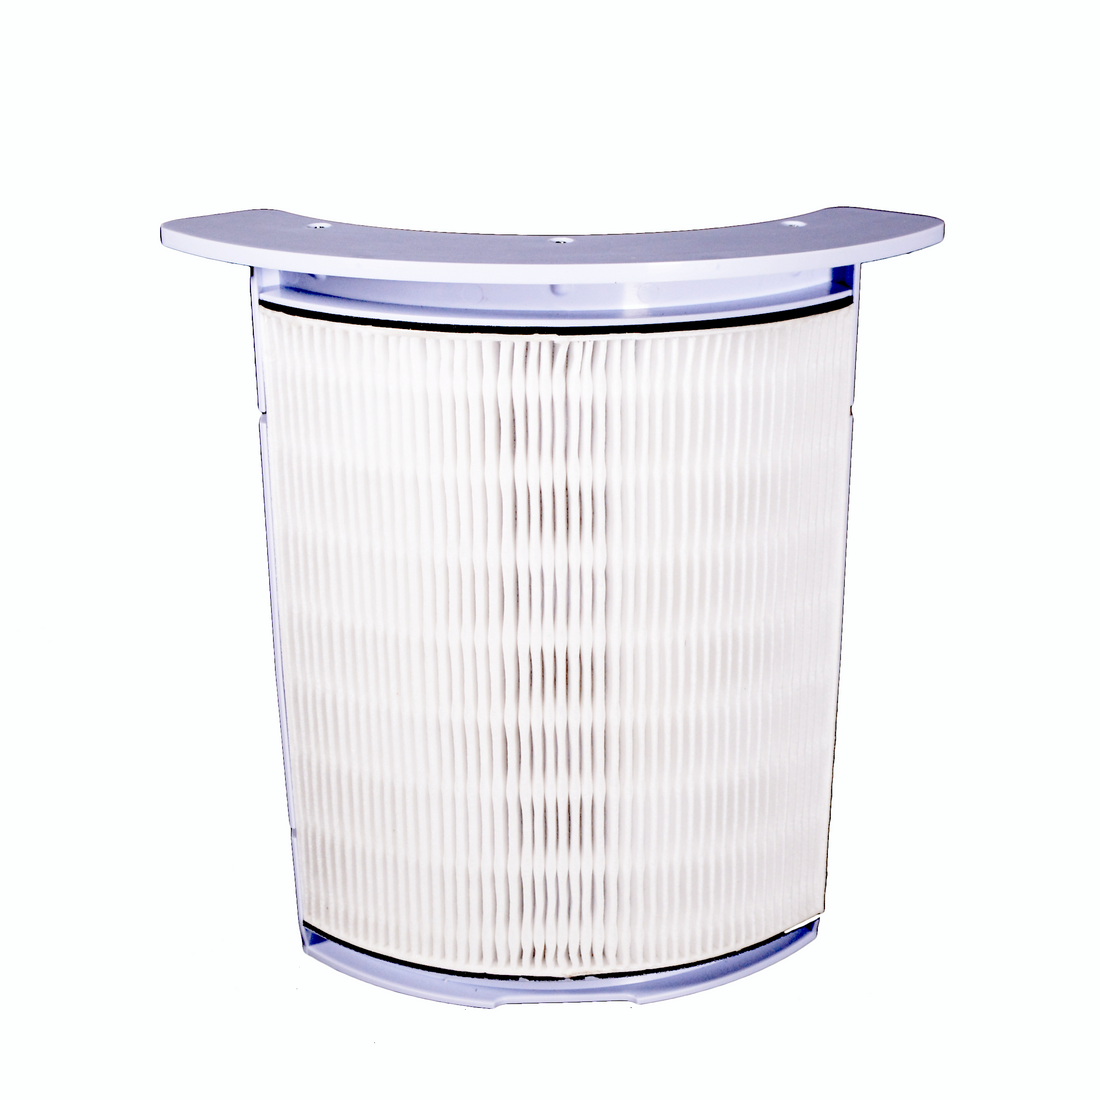 Verta® Washable Nano Tech Filter (Filters Viruses, Bacteria and Pollen)